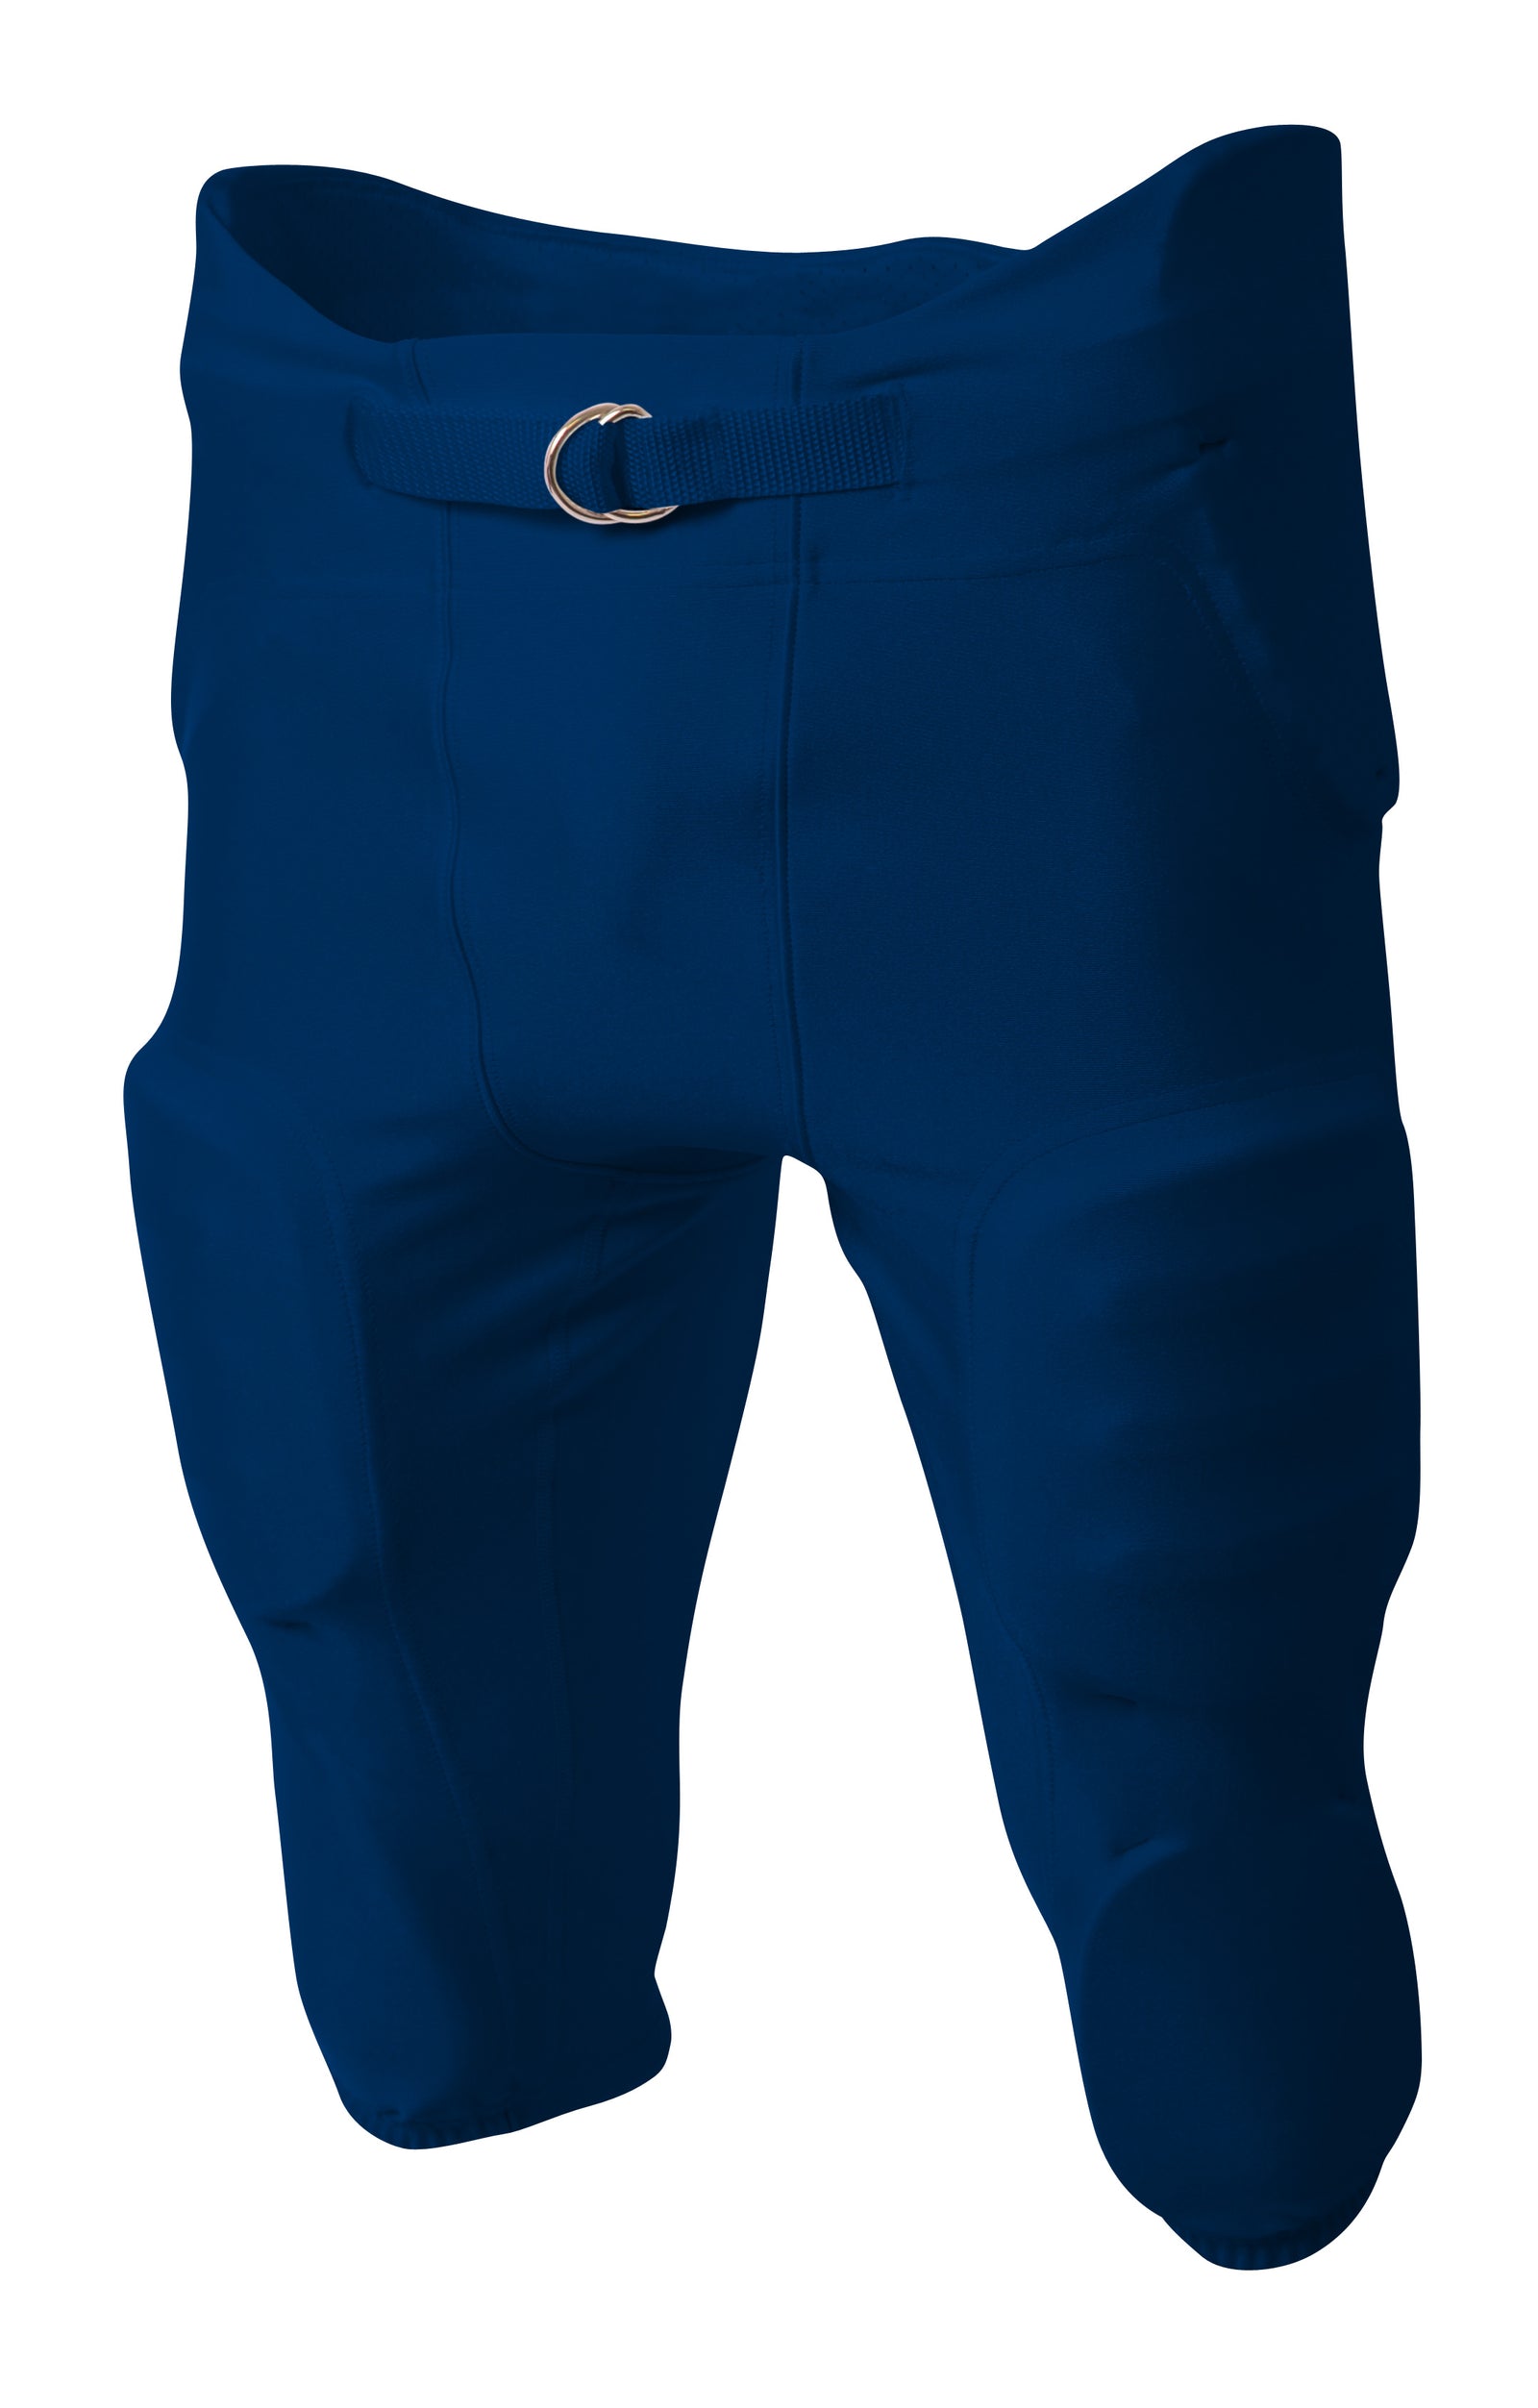 NAVY A4 Integrated Zone Football Pant